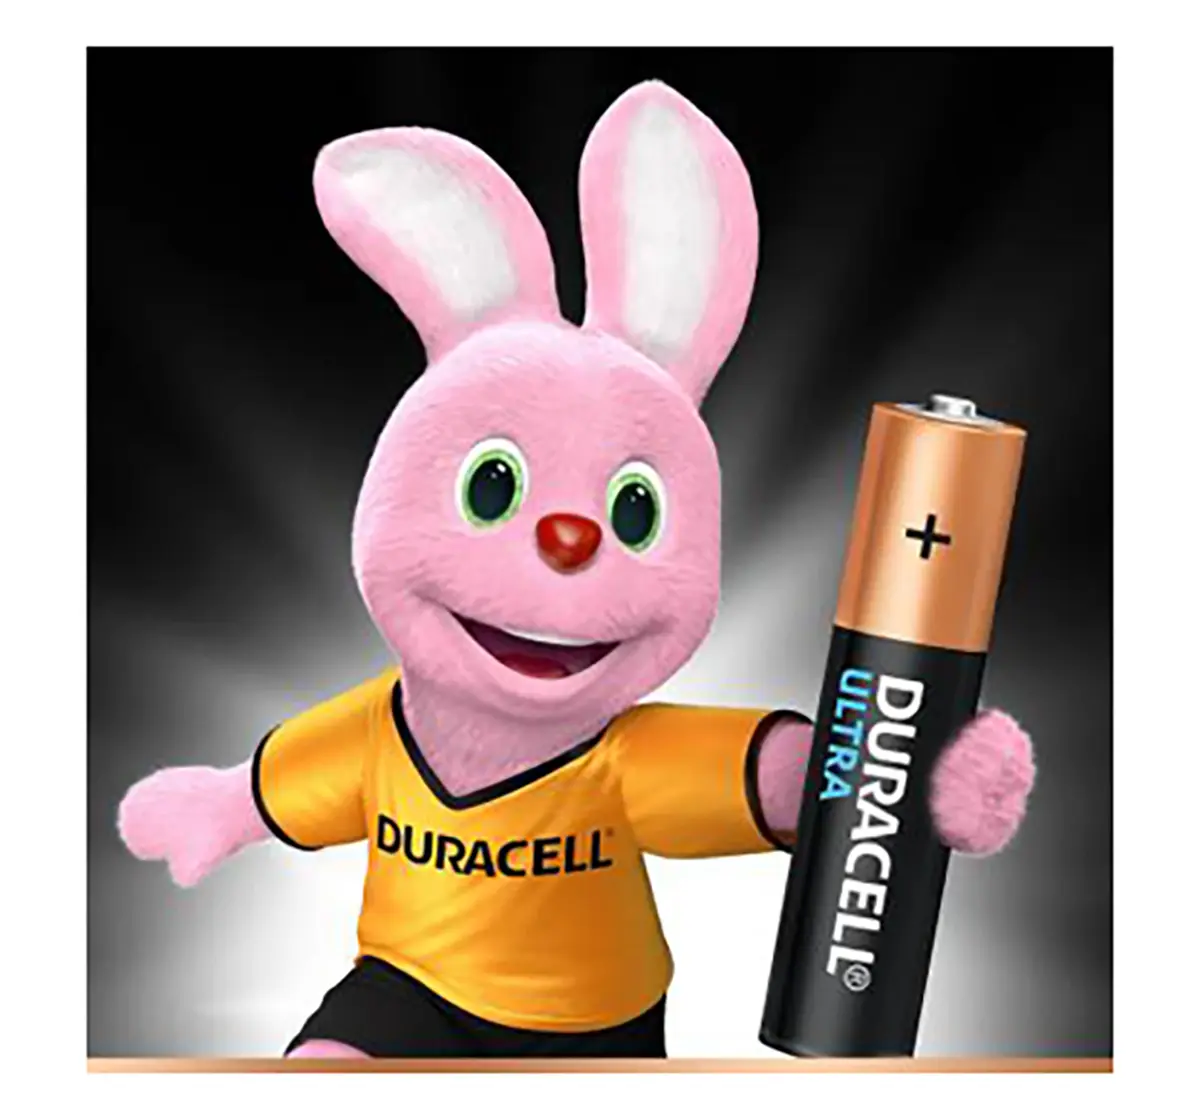 Duracell Ultra AAA Batteries - Pack of 2 Essentials for Kids age 3Y+ 